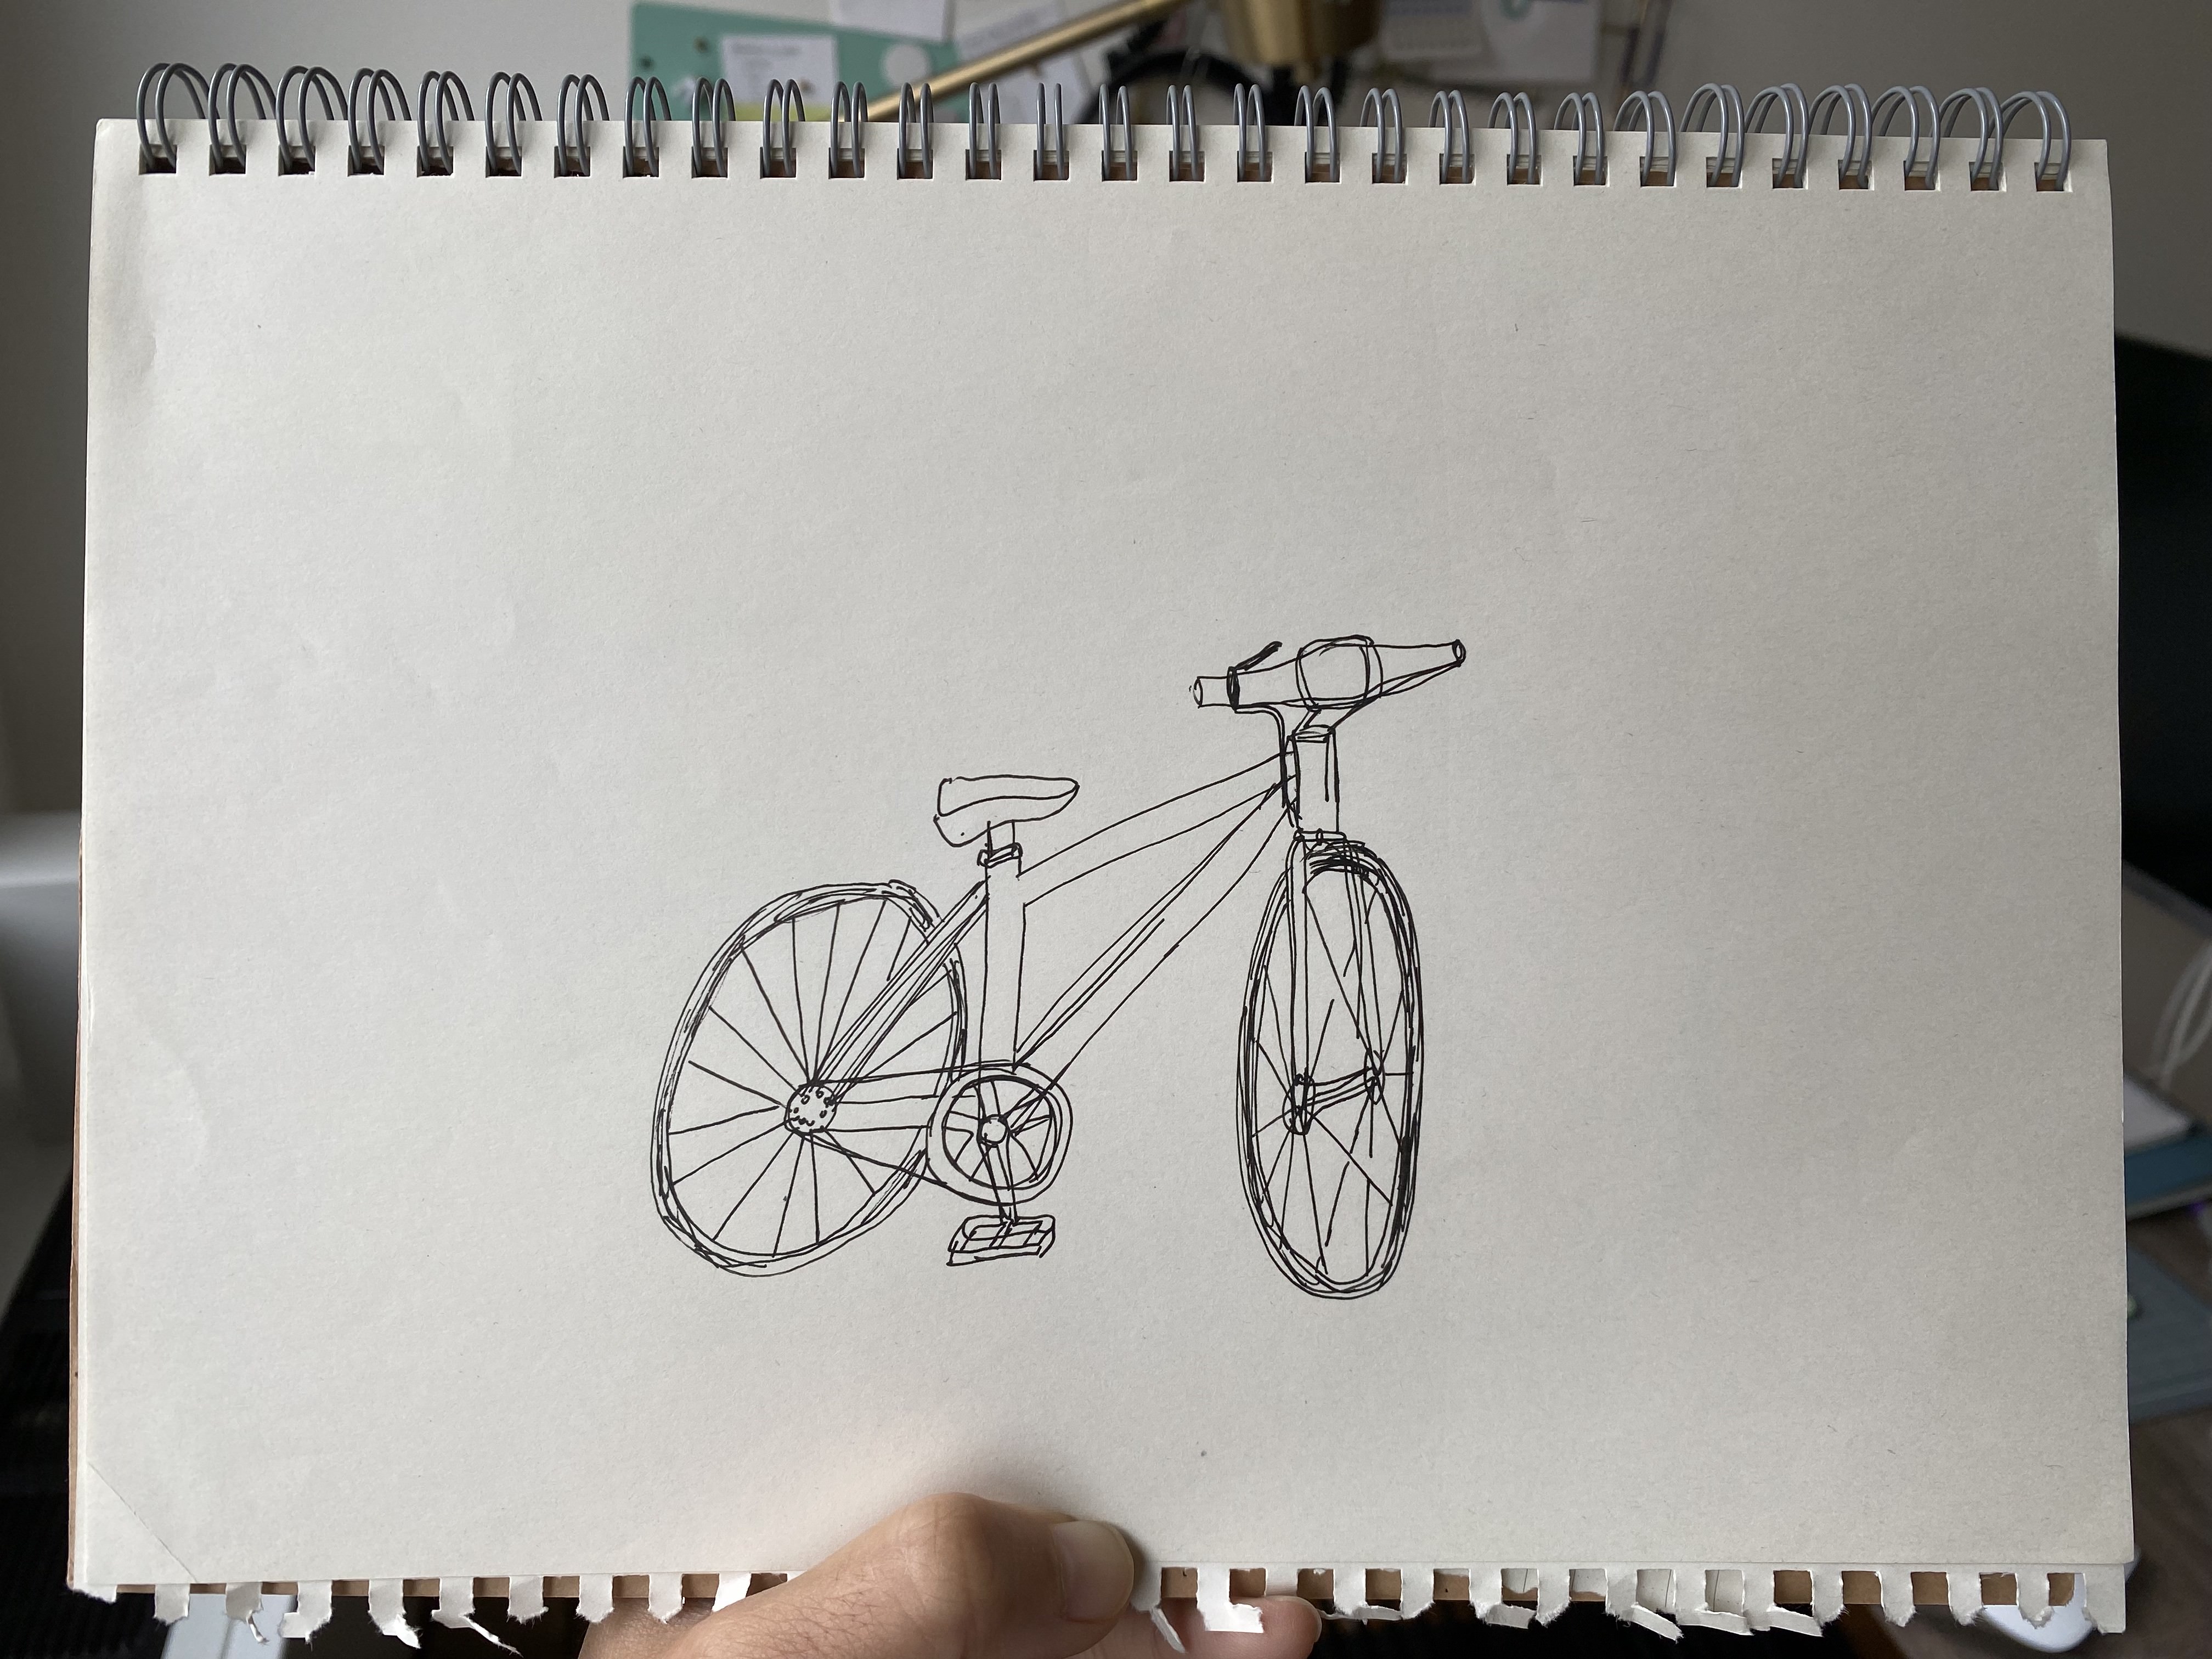 A rudimentary sketch of a bicycle